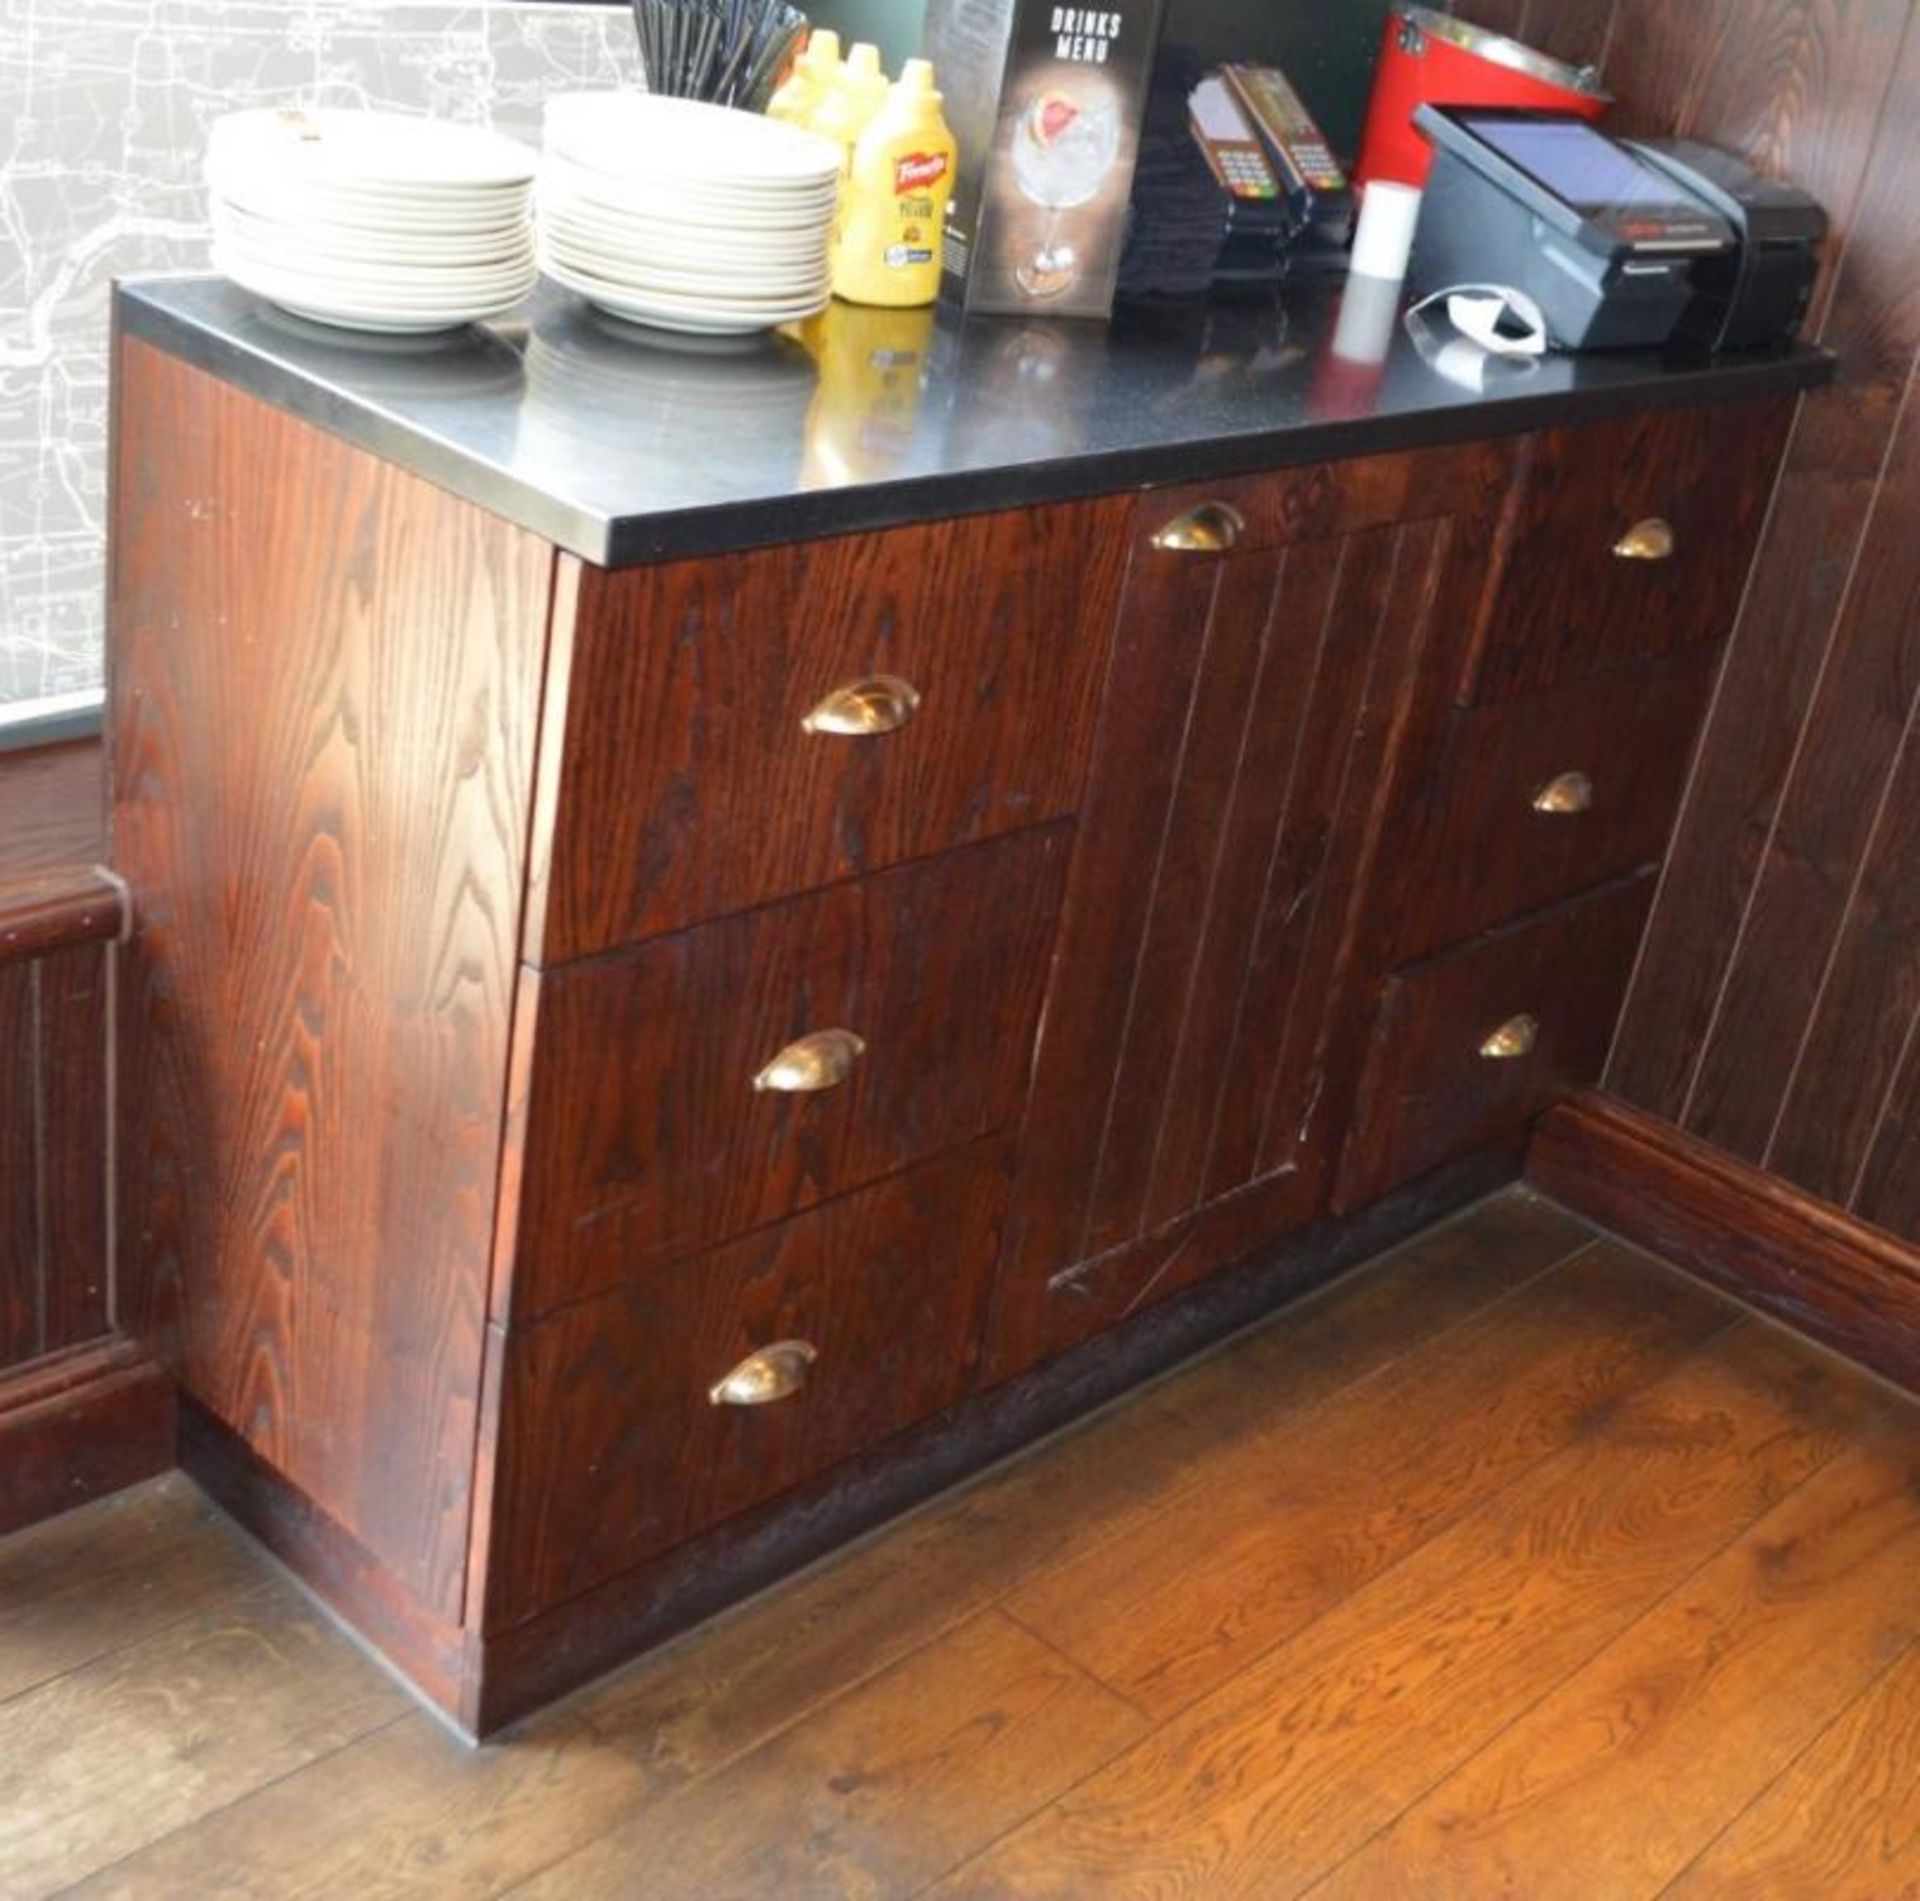 1 x Waitress Server Counter With Dark Wood Finish, Brass Hardware and Stone Top - H96 x W150 x D52